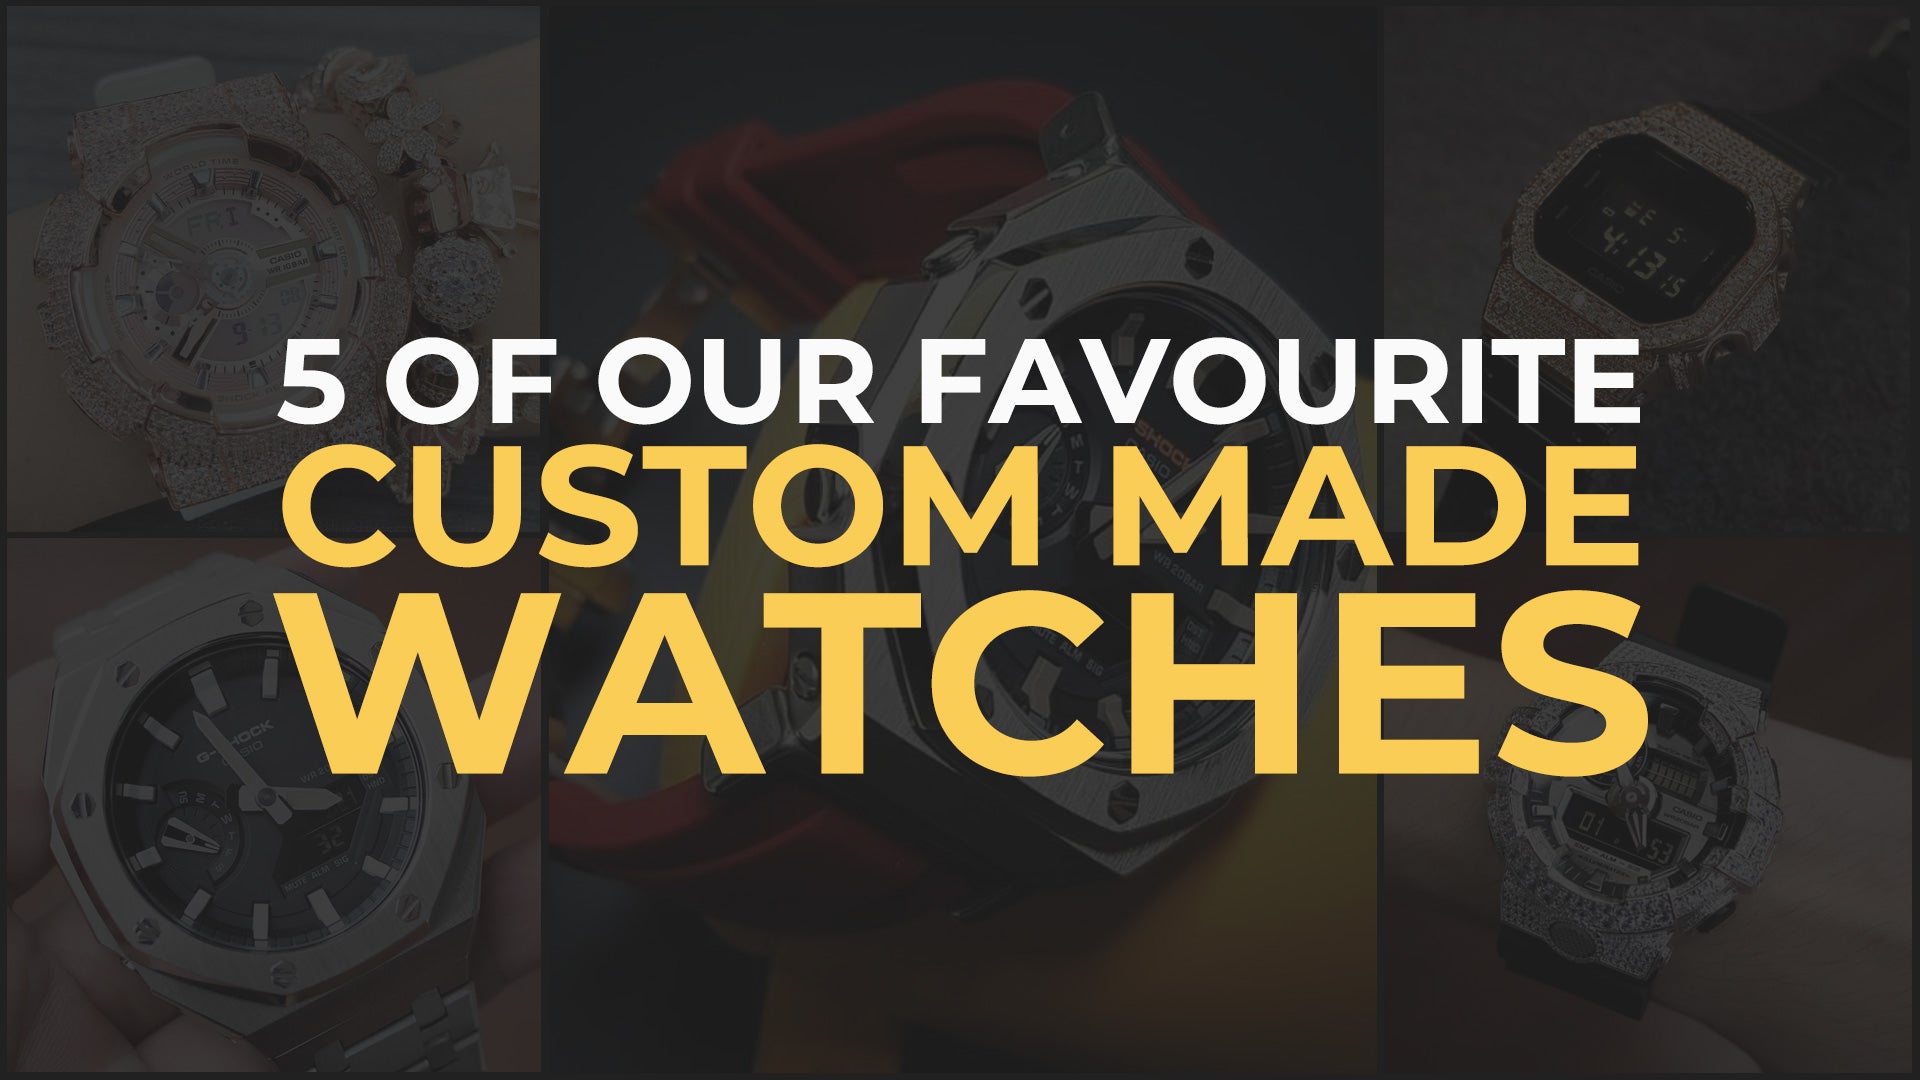 5 Of Our Favourite Custom Made Watches